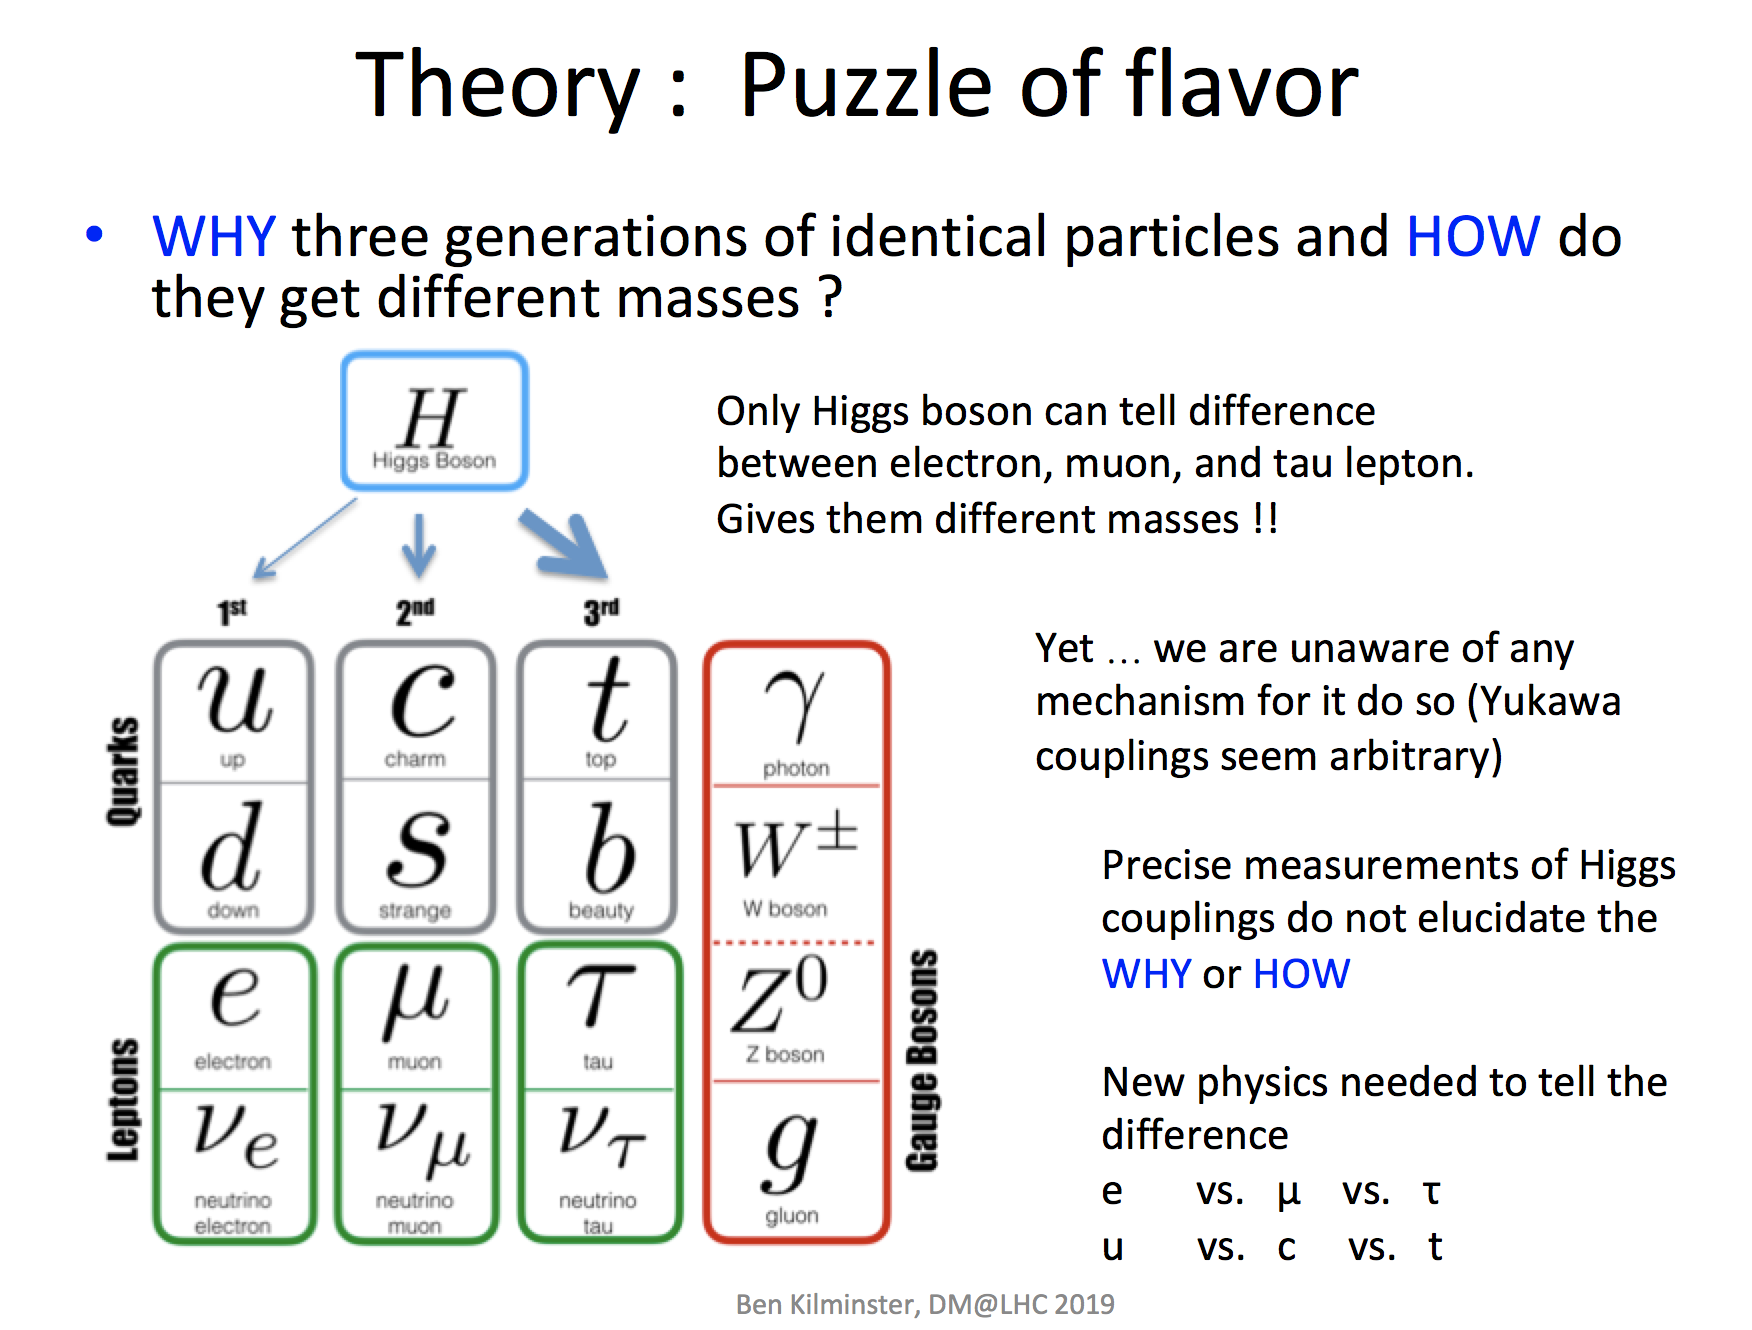 Higgs boson and flavor